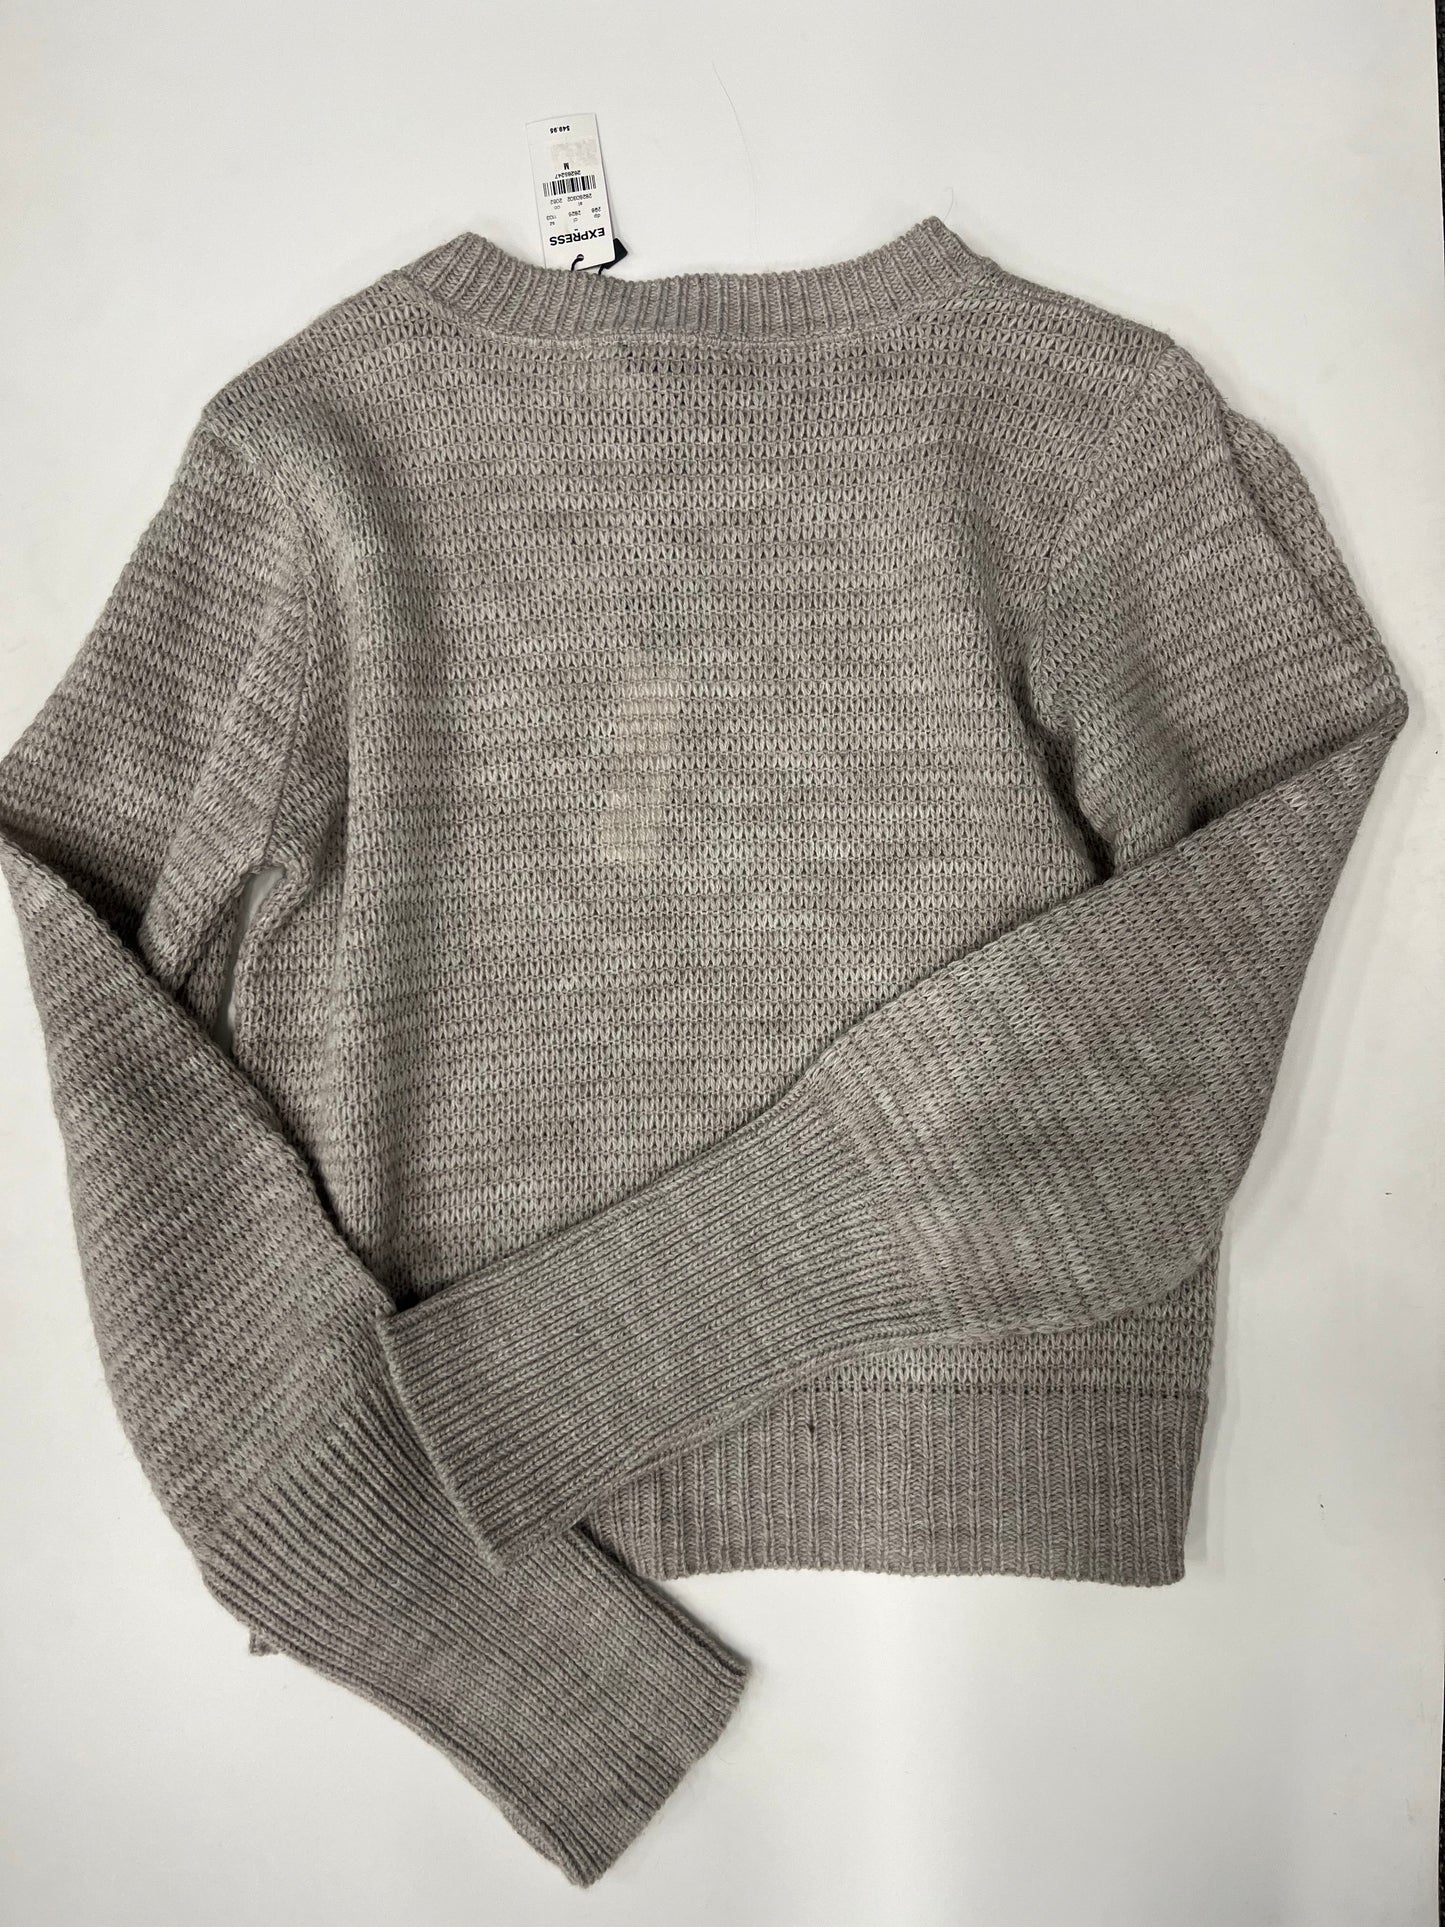 Sweater By Express NWT  Size: M